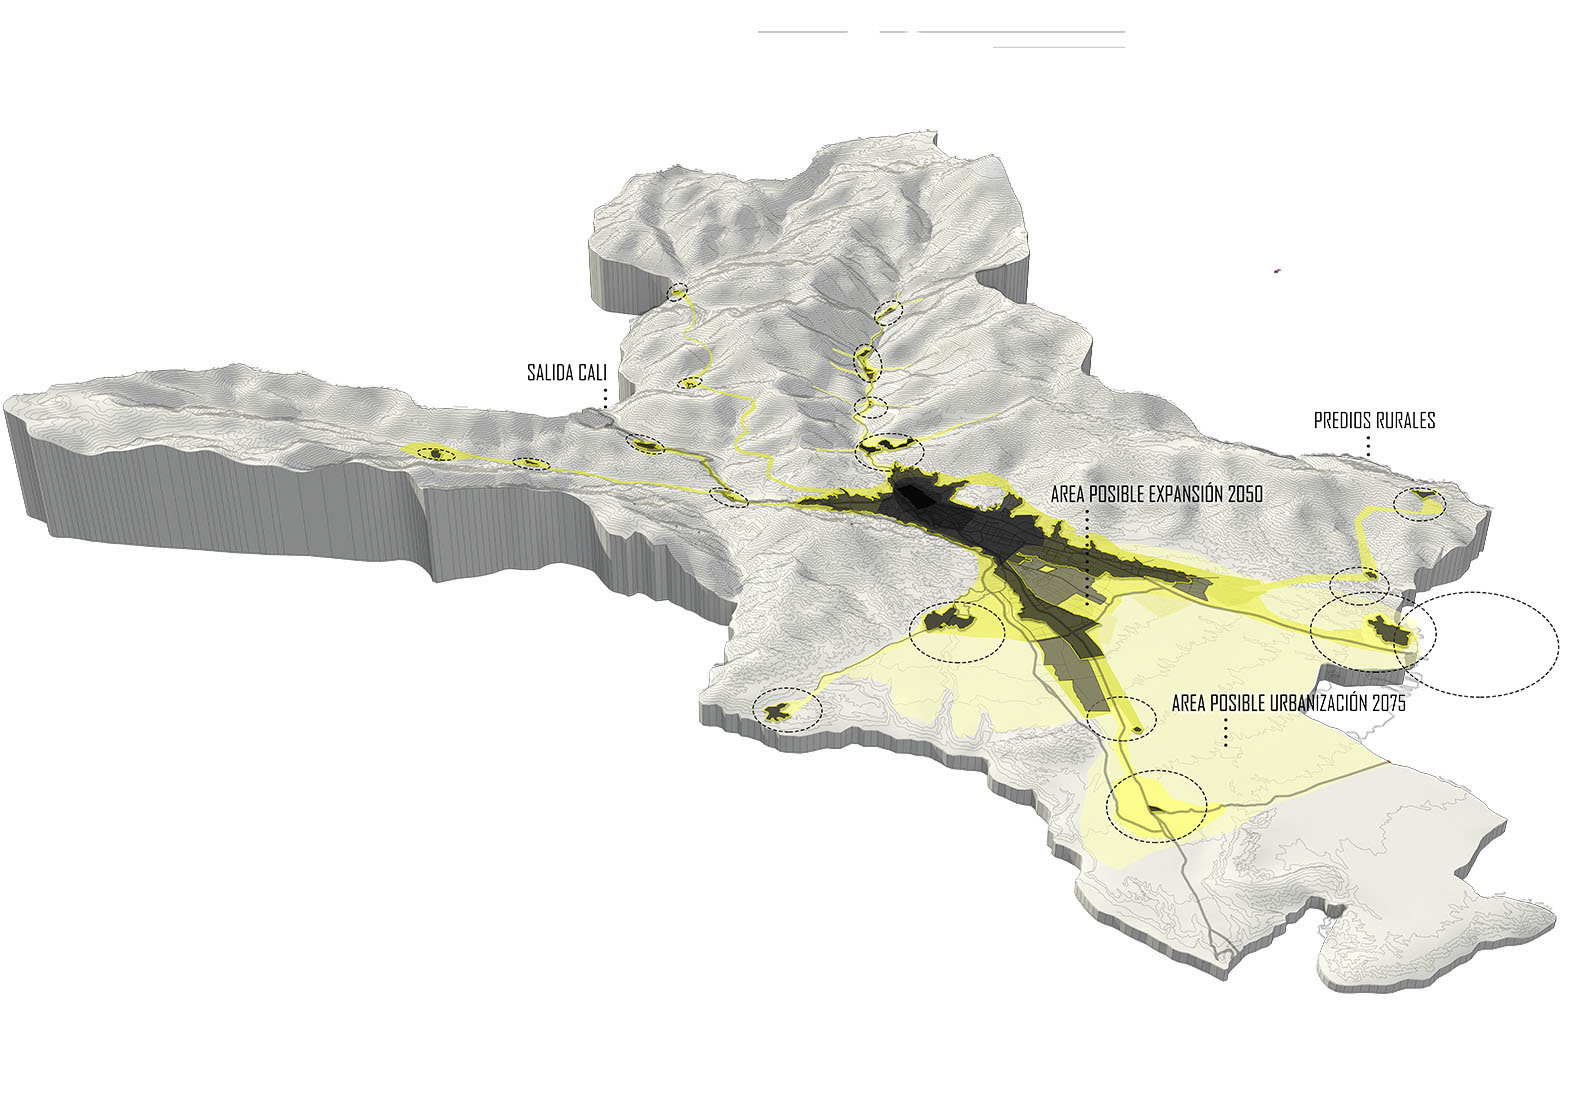 Ibague's expansion areas analysis